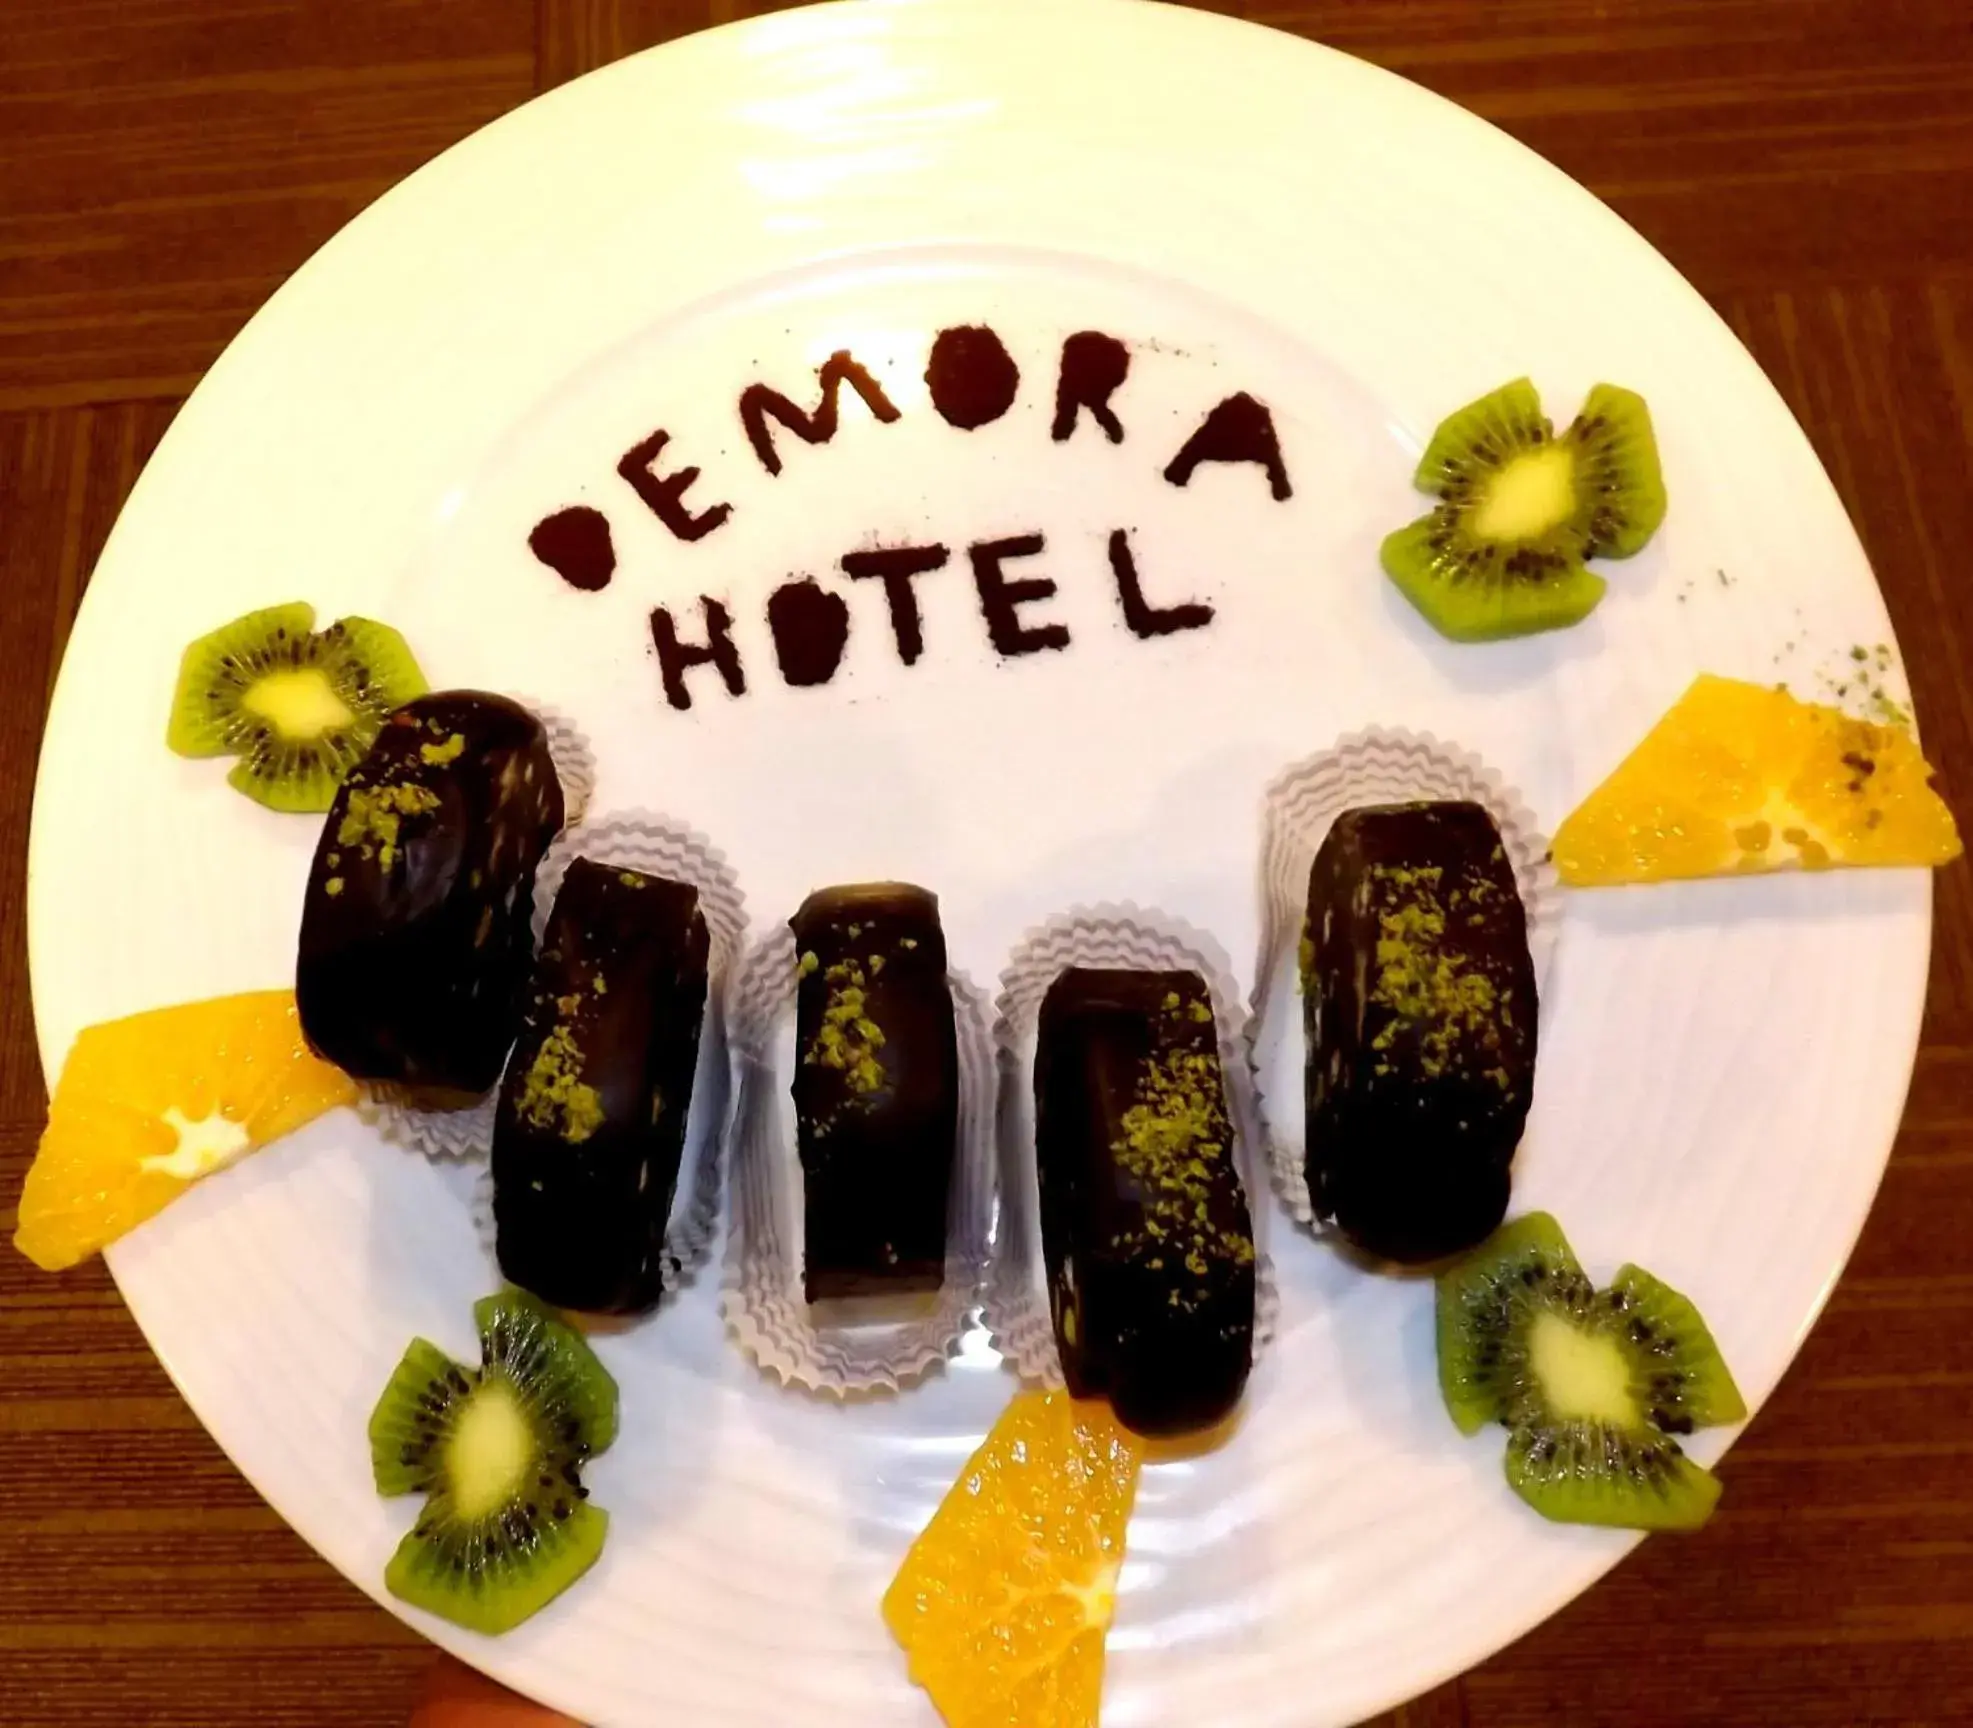 Food and drinks in Demora Hotel